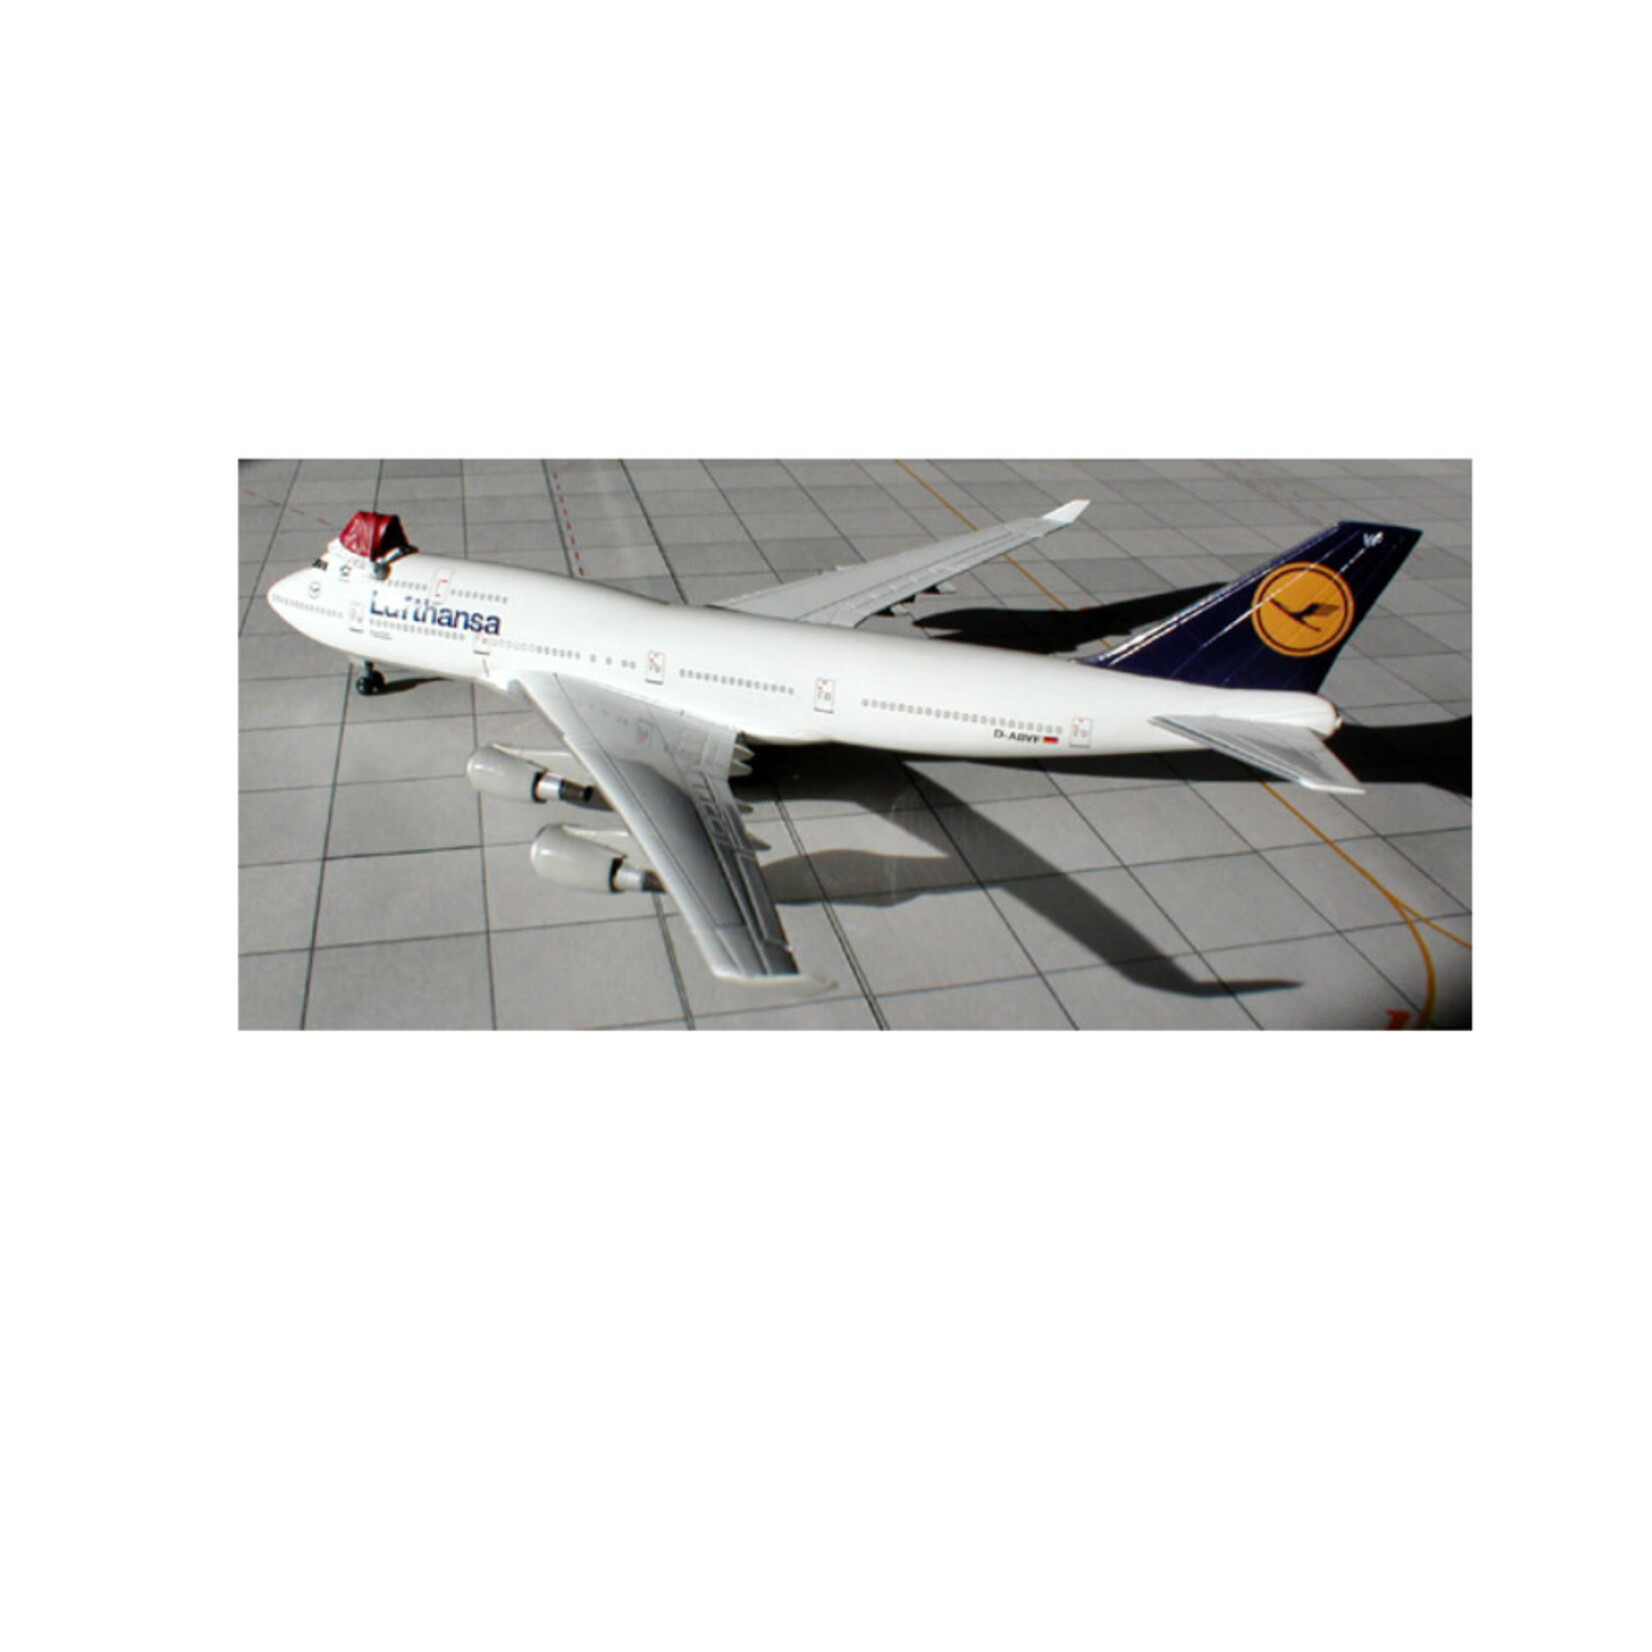 DRAGON WING DRAGON WINGS 1/400 LUFTHANSA B747-400 MERRY CHRISTMAS LIMITED EDTION